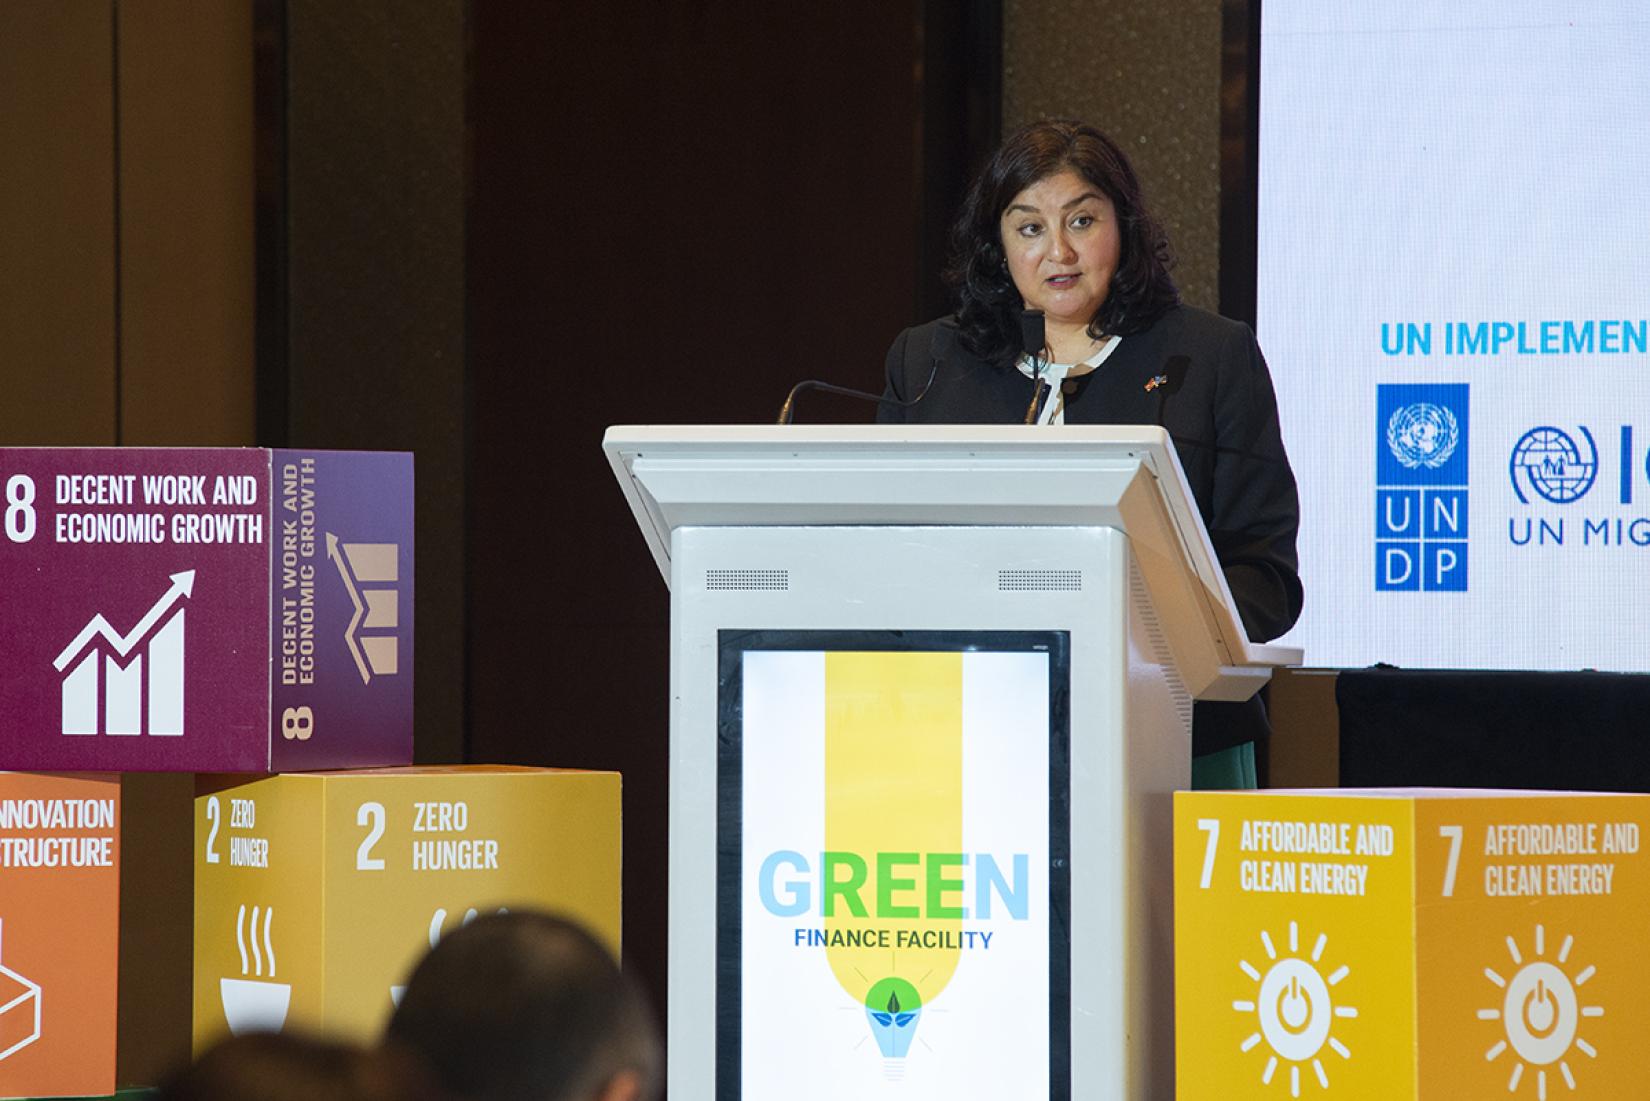 UN Resident Coordinator in North Macedonia Rossana Dudziak speaking at the Green Finance Facility Product launch event